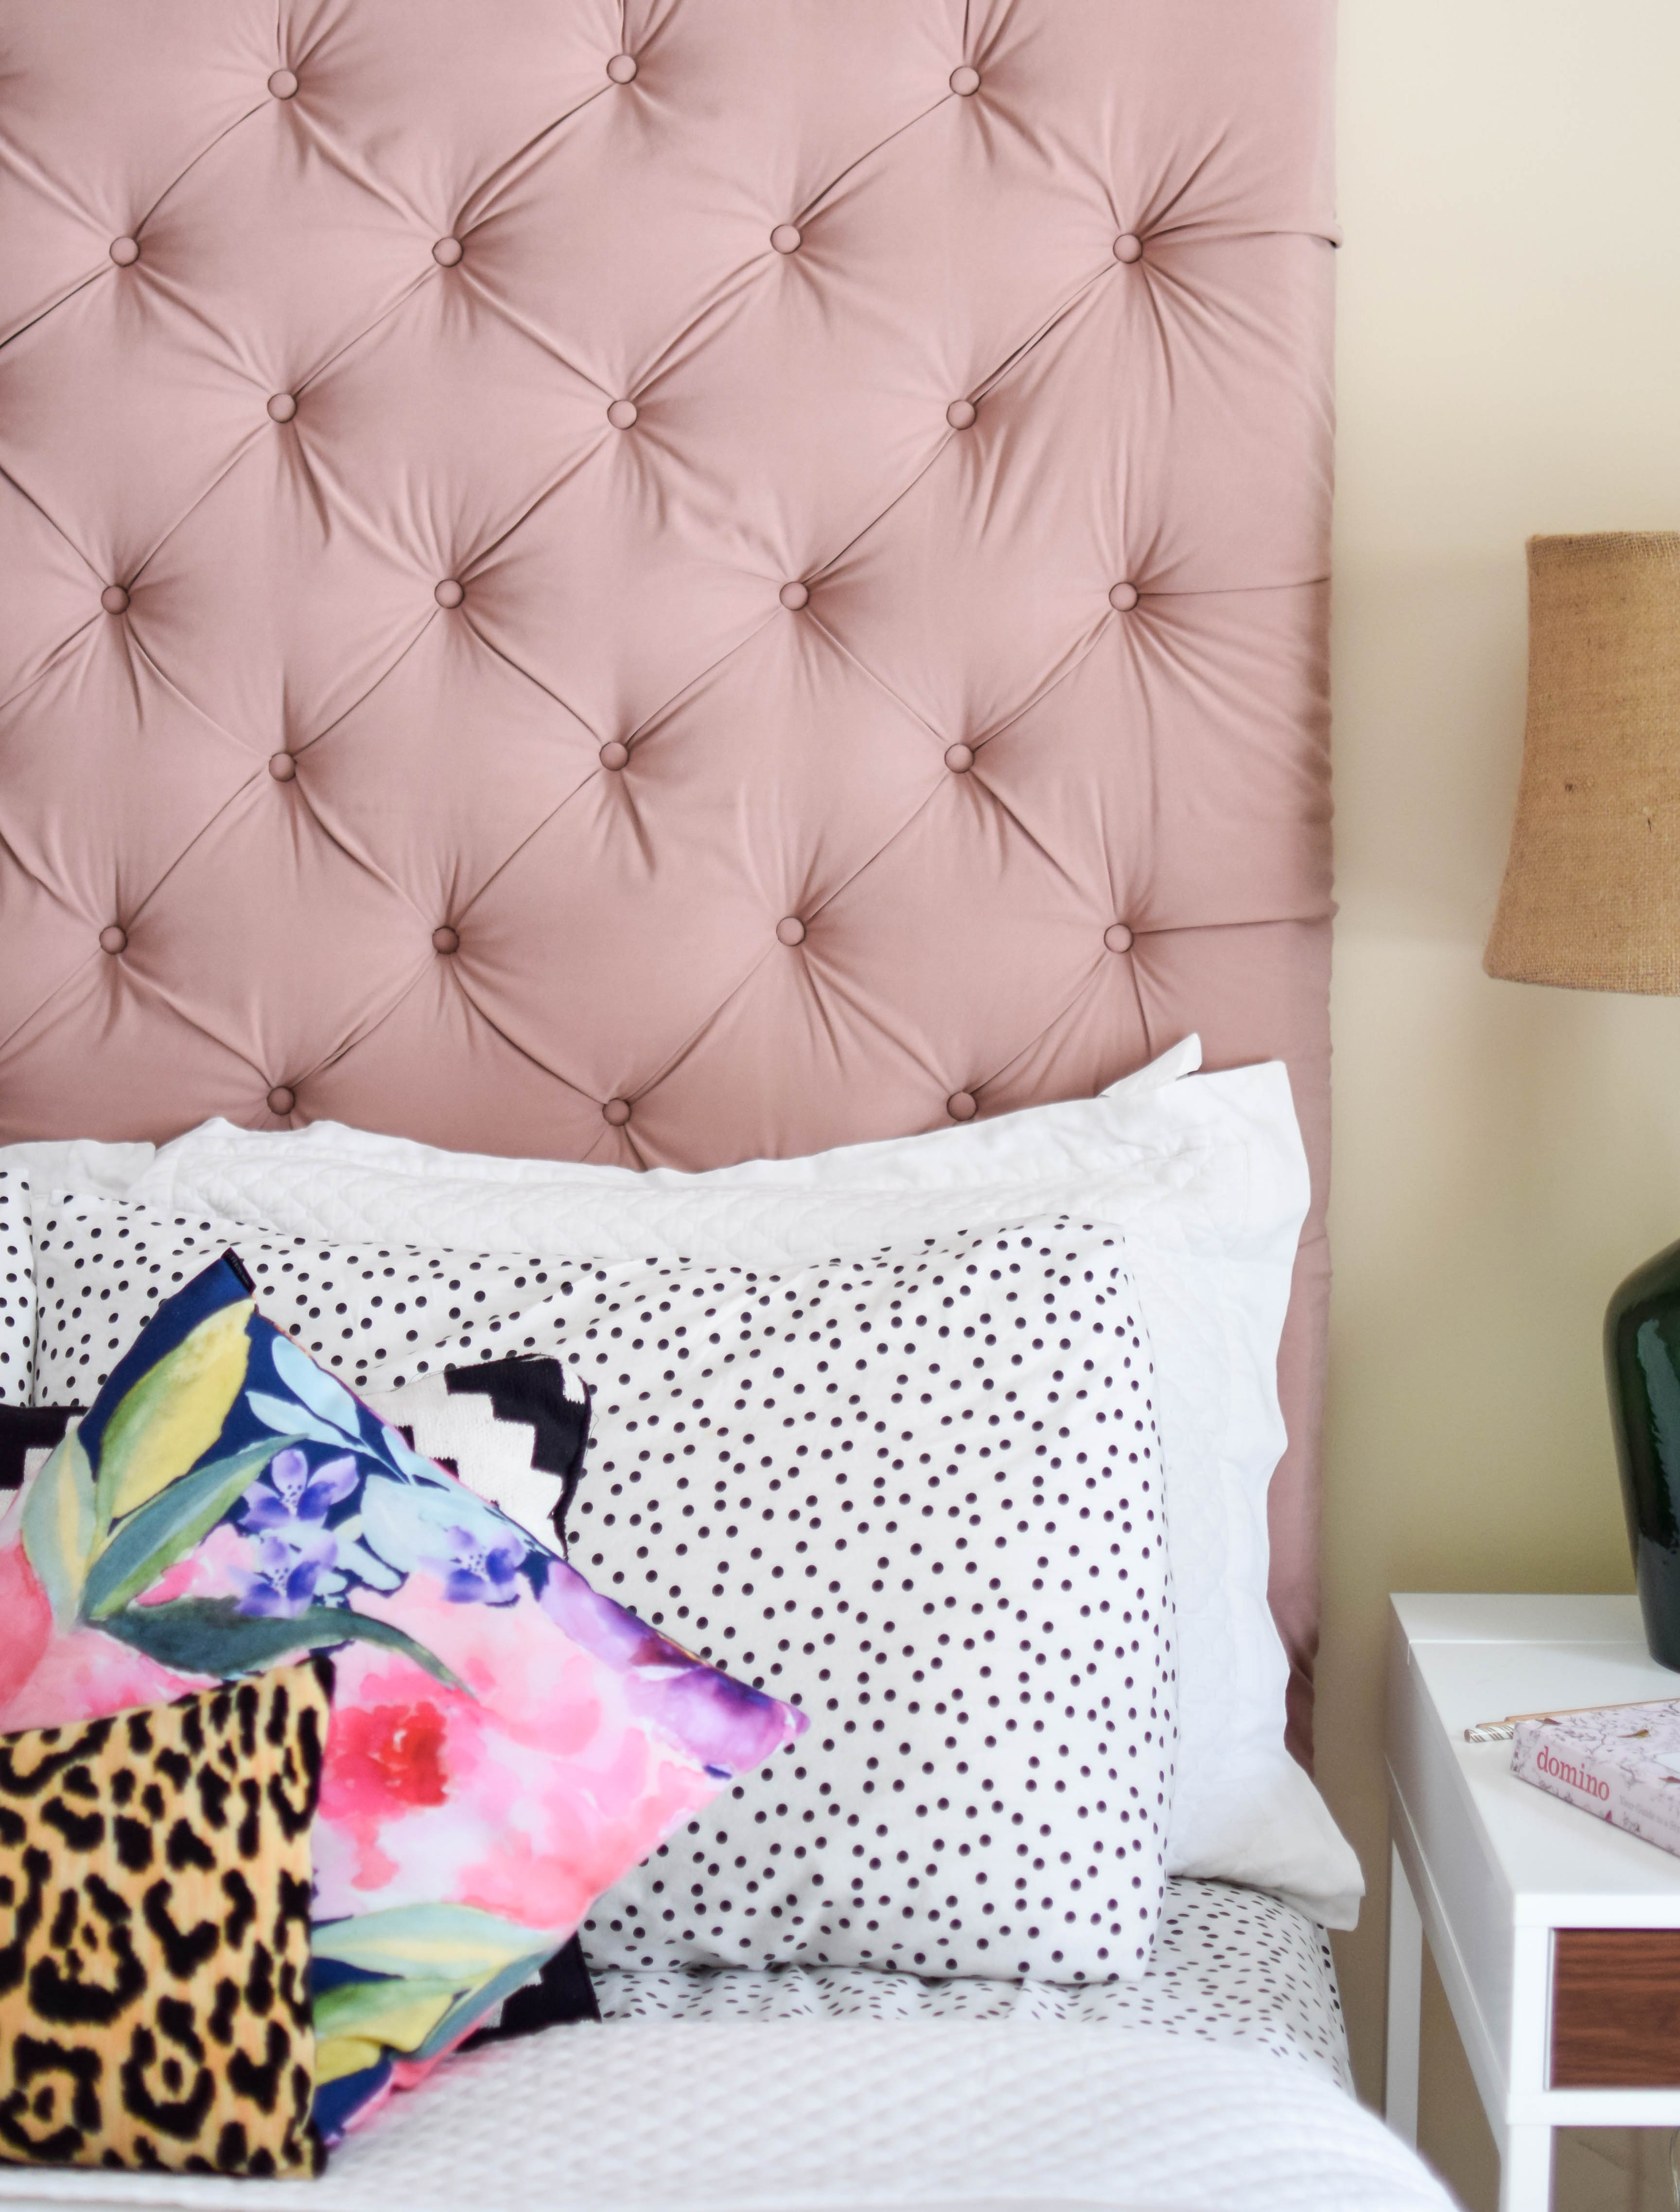 Diy Tufted Headboard Over Sized, How To Make A Fabric Headboard For King Size Bed